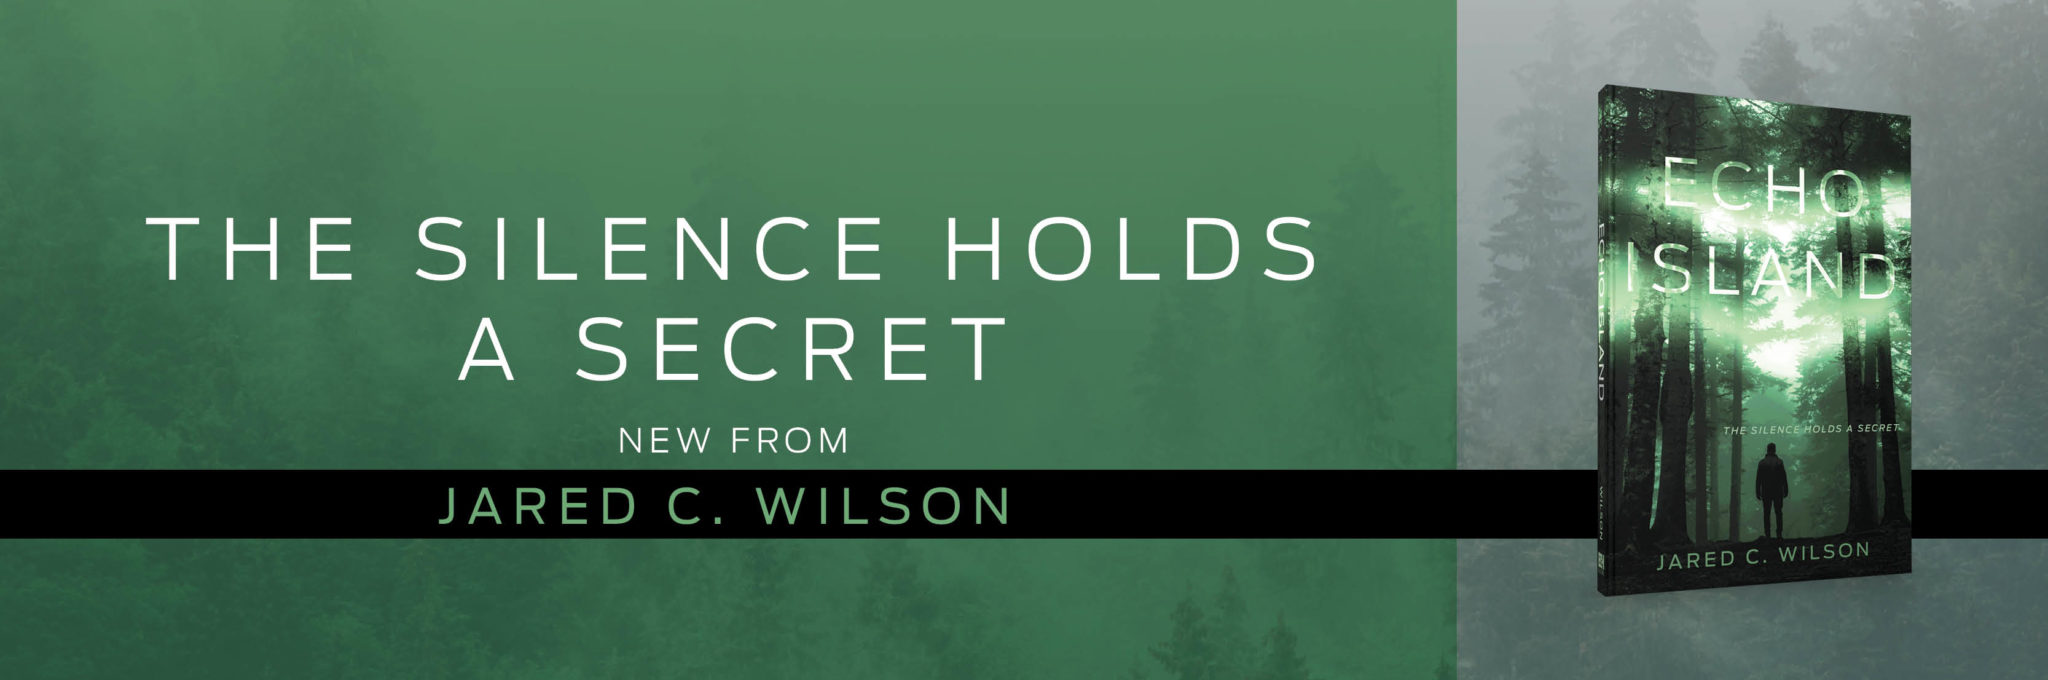 The silence holds a secret · New from Jared C. Wilson